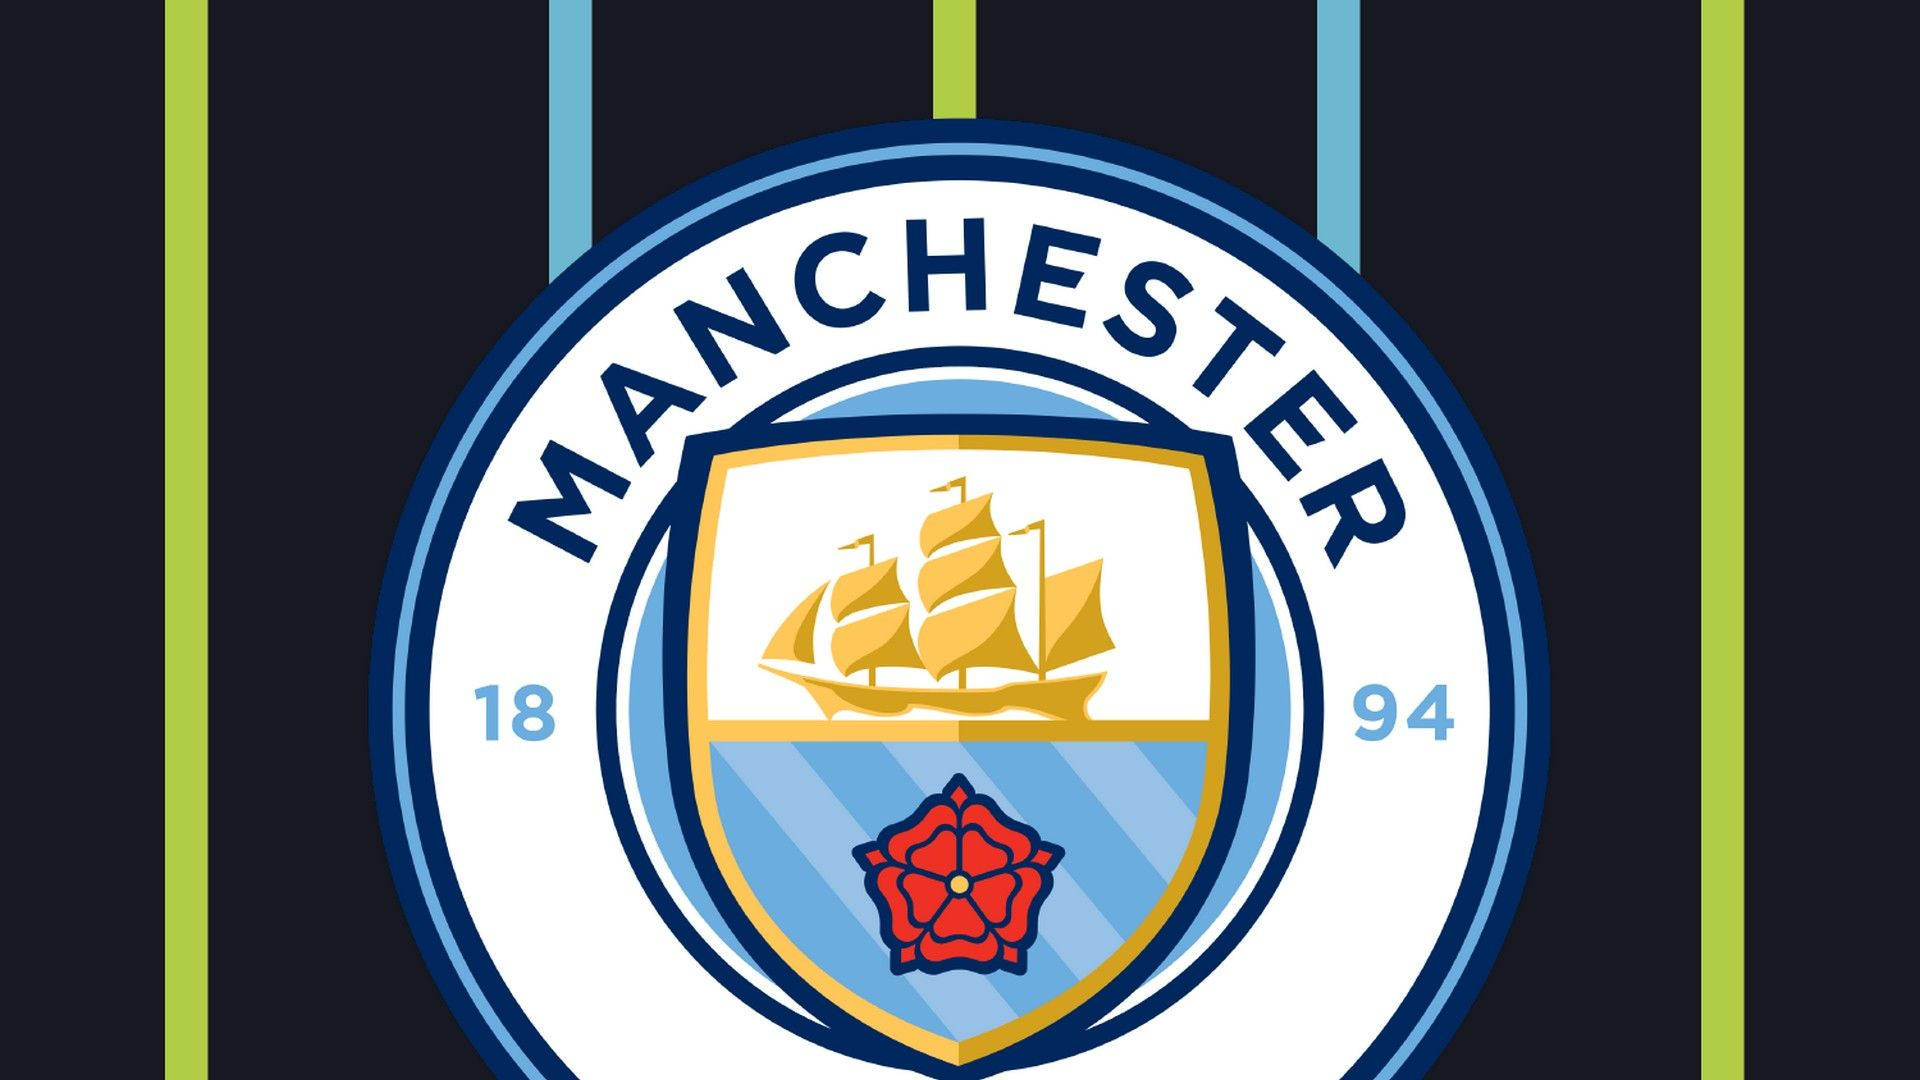 Show your support with the iconic Manchester City Logo! Wallpaper